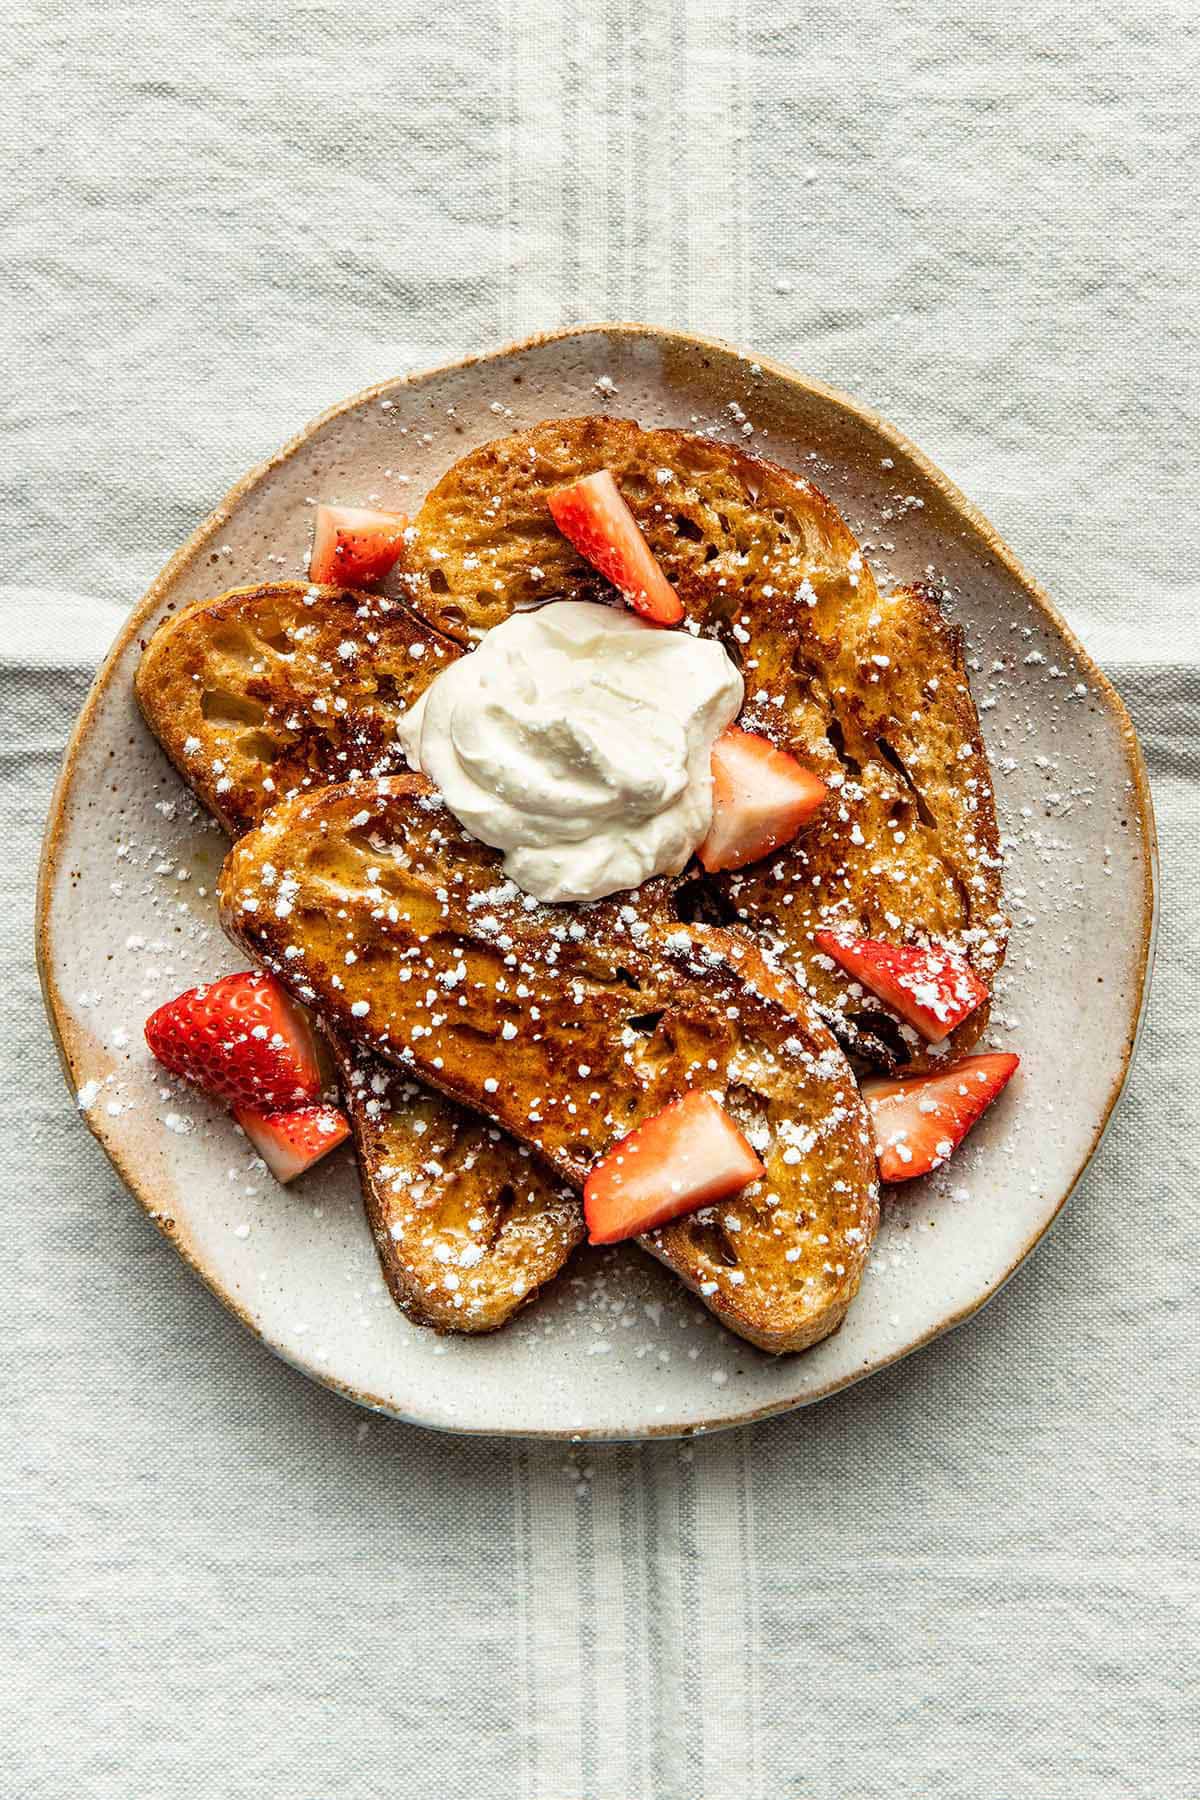 A plate with three slices of french toast topped with cream and strawberries.